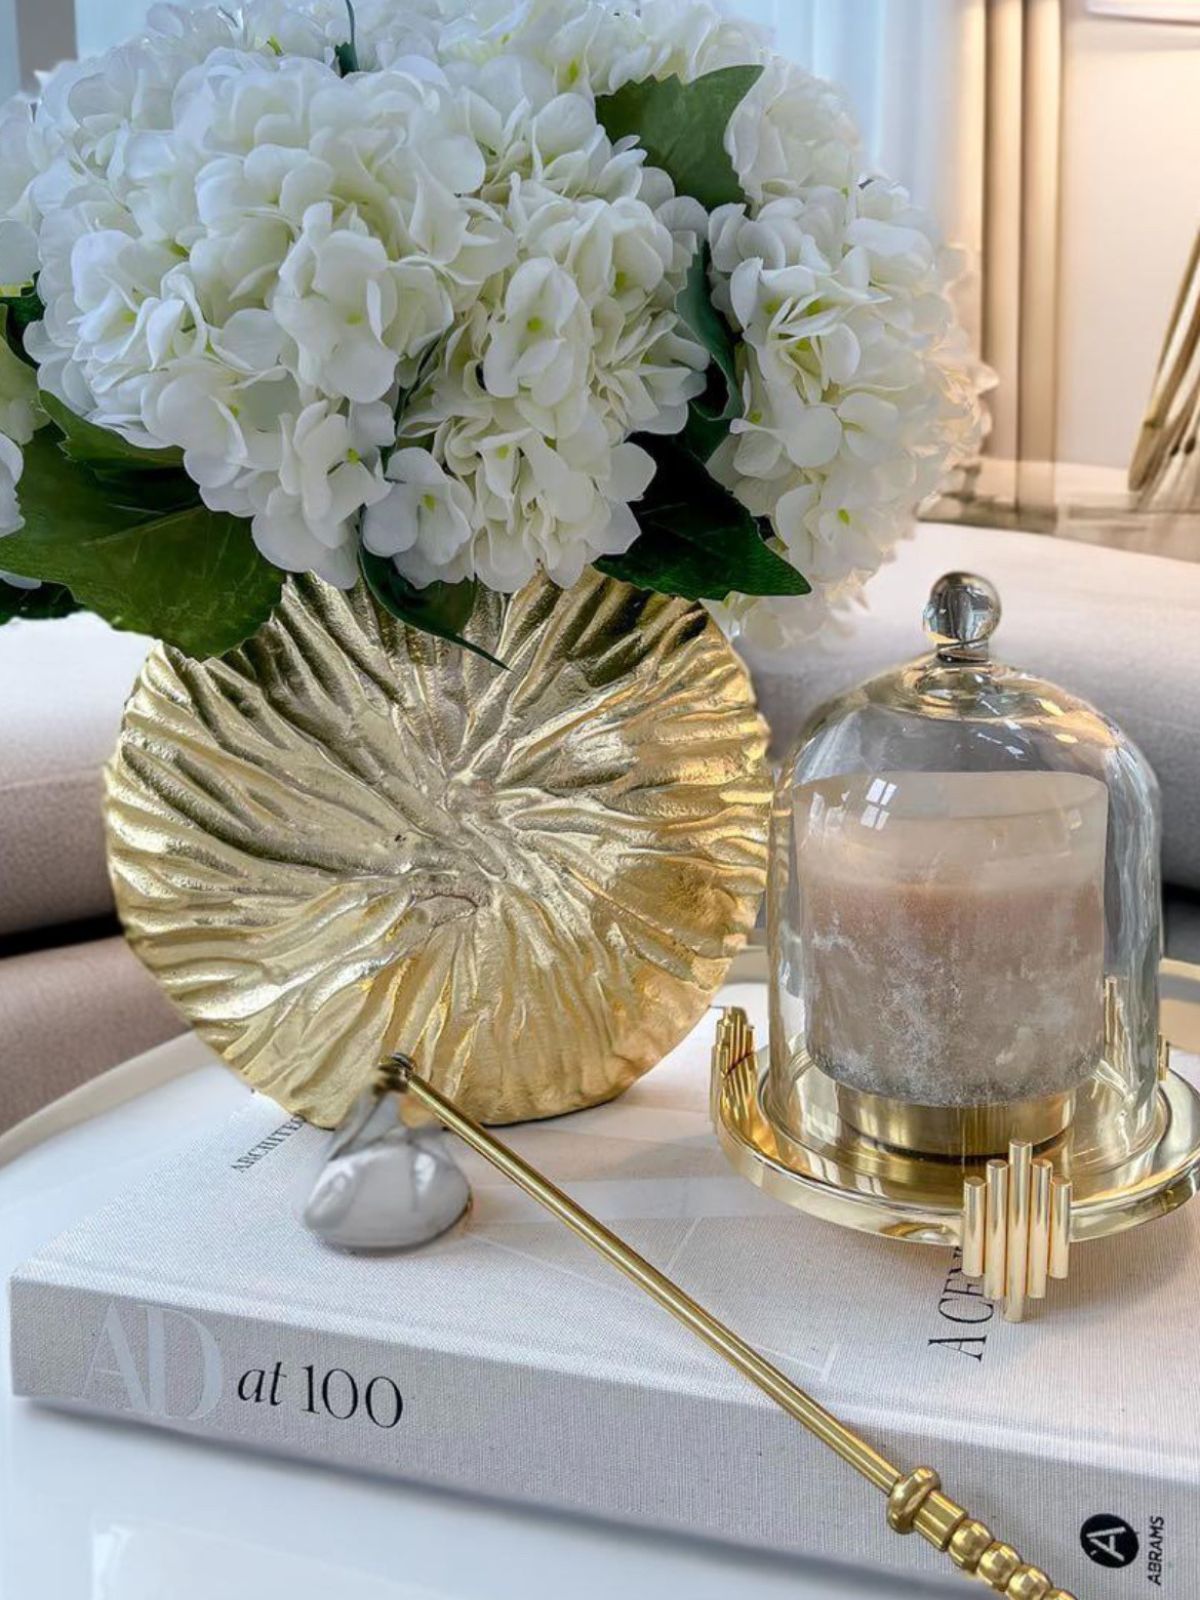 Gold round luxury vase with a stunning textured metal finish, perfect vase for faux flowers. Product Measures, 9.5L x 3.25W x 8.25H inches.